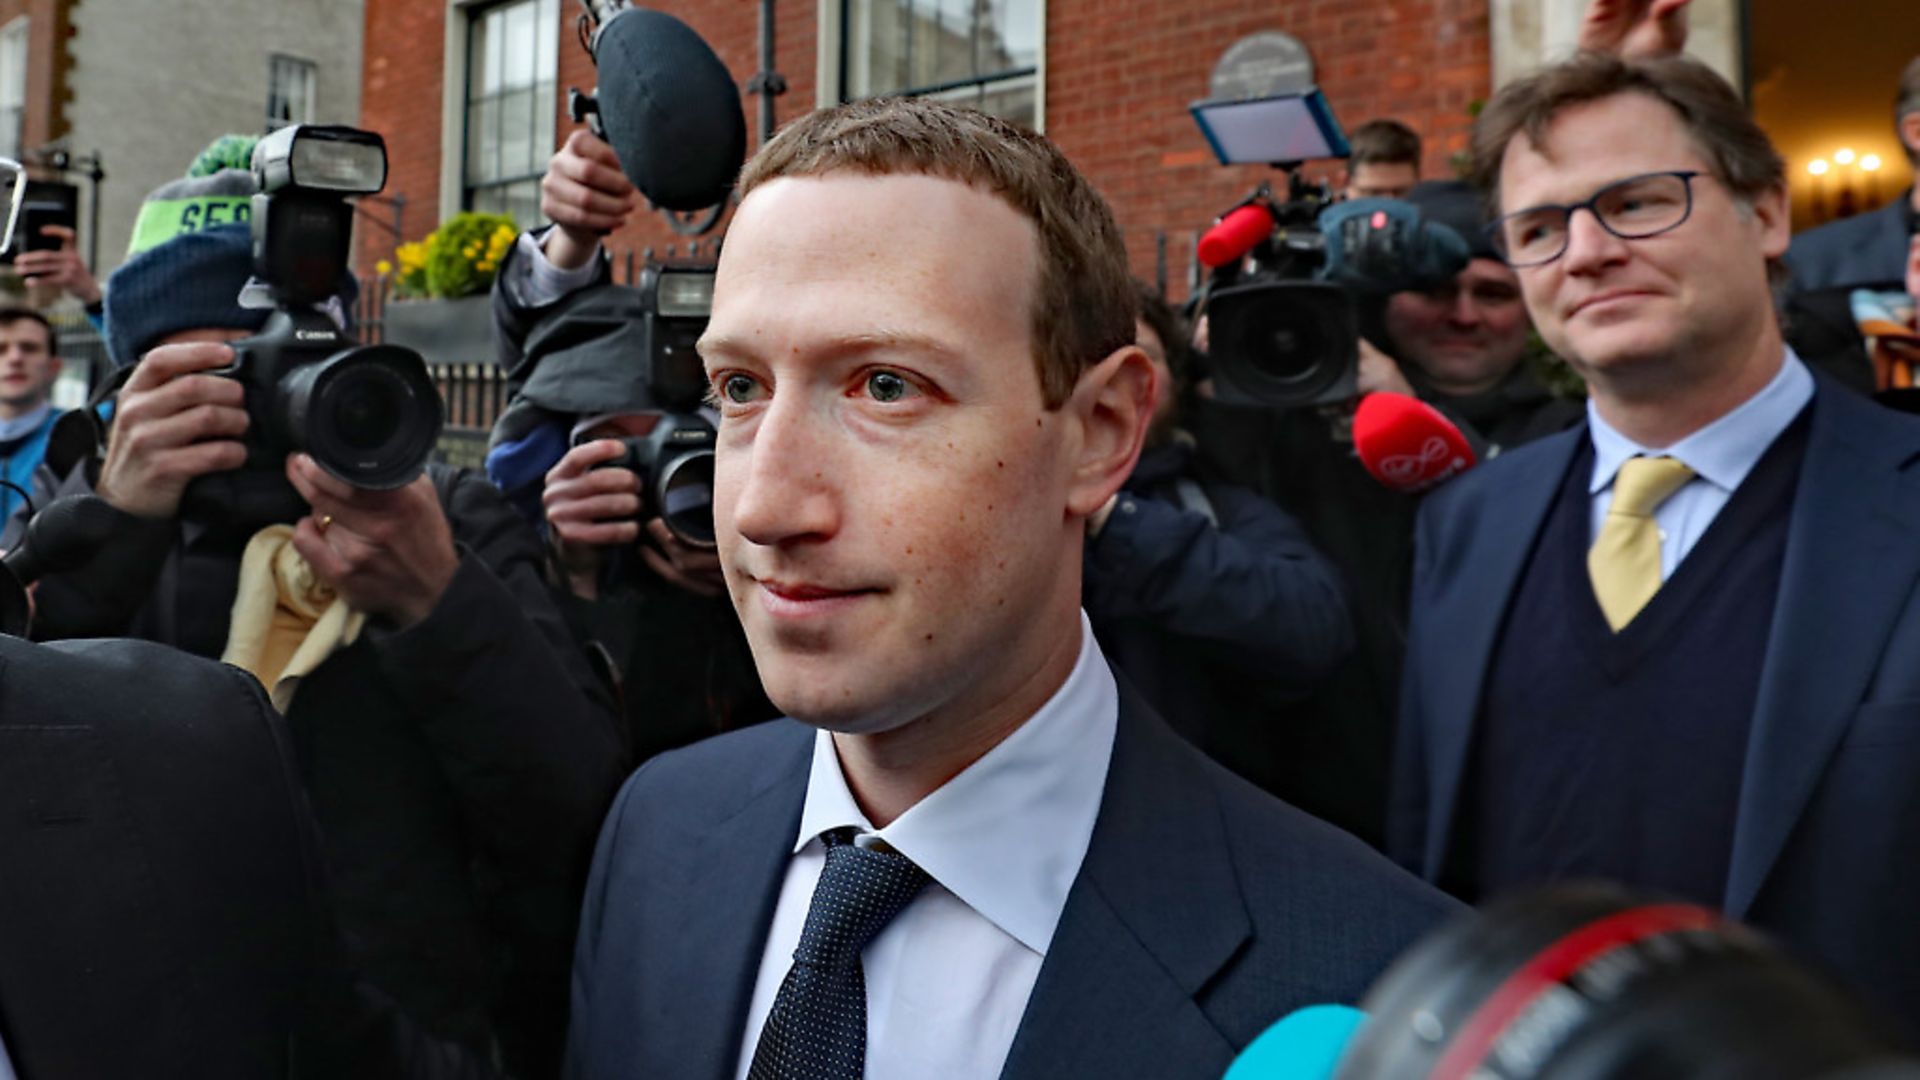 Facebook CEO Mark Zuckerberg has been criticised for allowing political adverts that contain falsehoods. Picture: Niall Carson/PA Wire/PA Images - Credit: PA Wire/PA Images